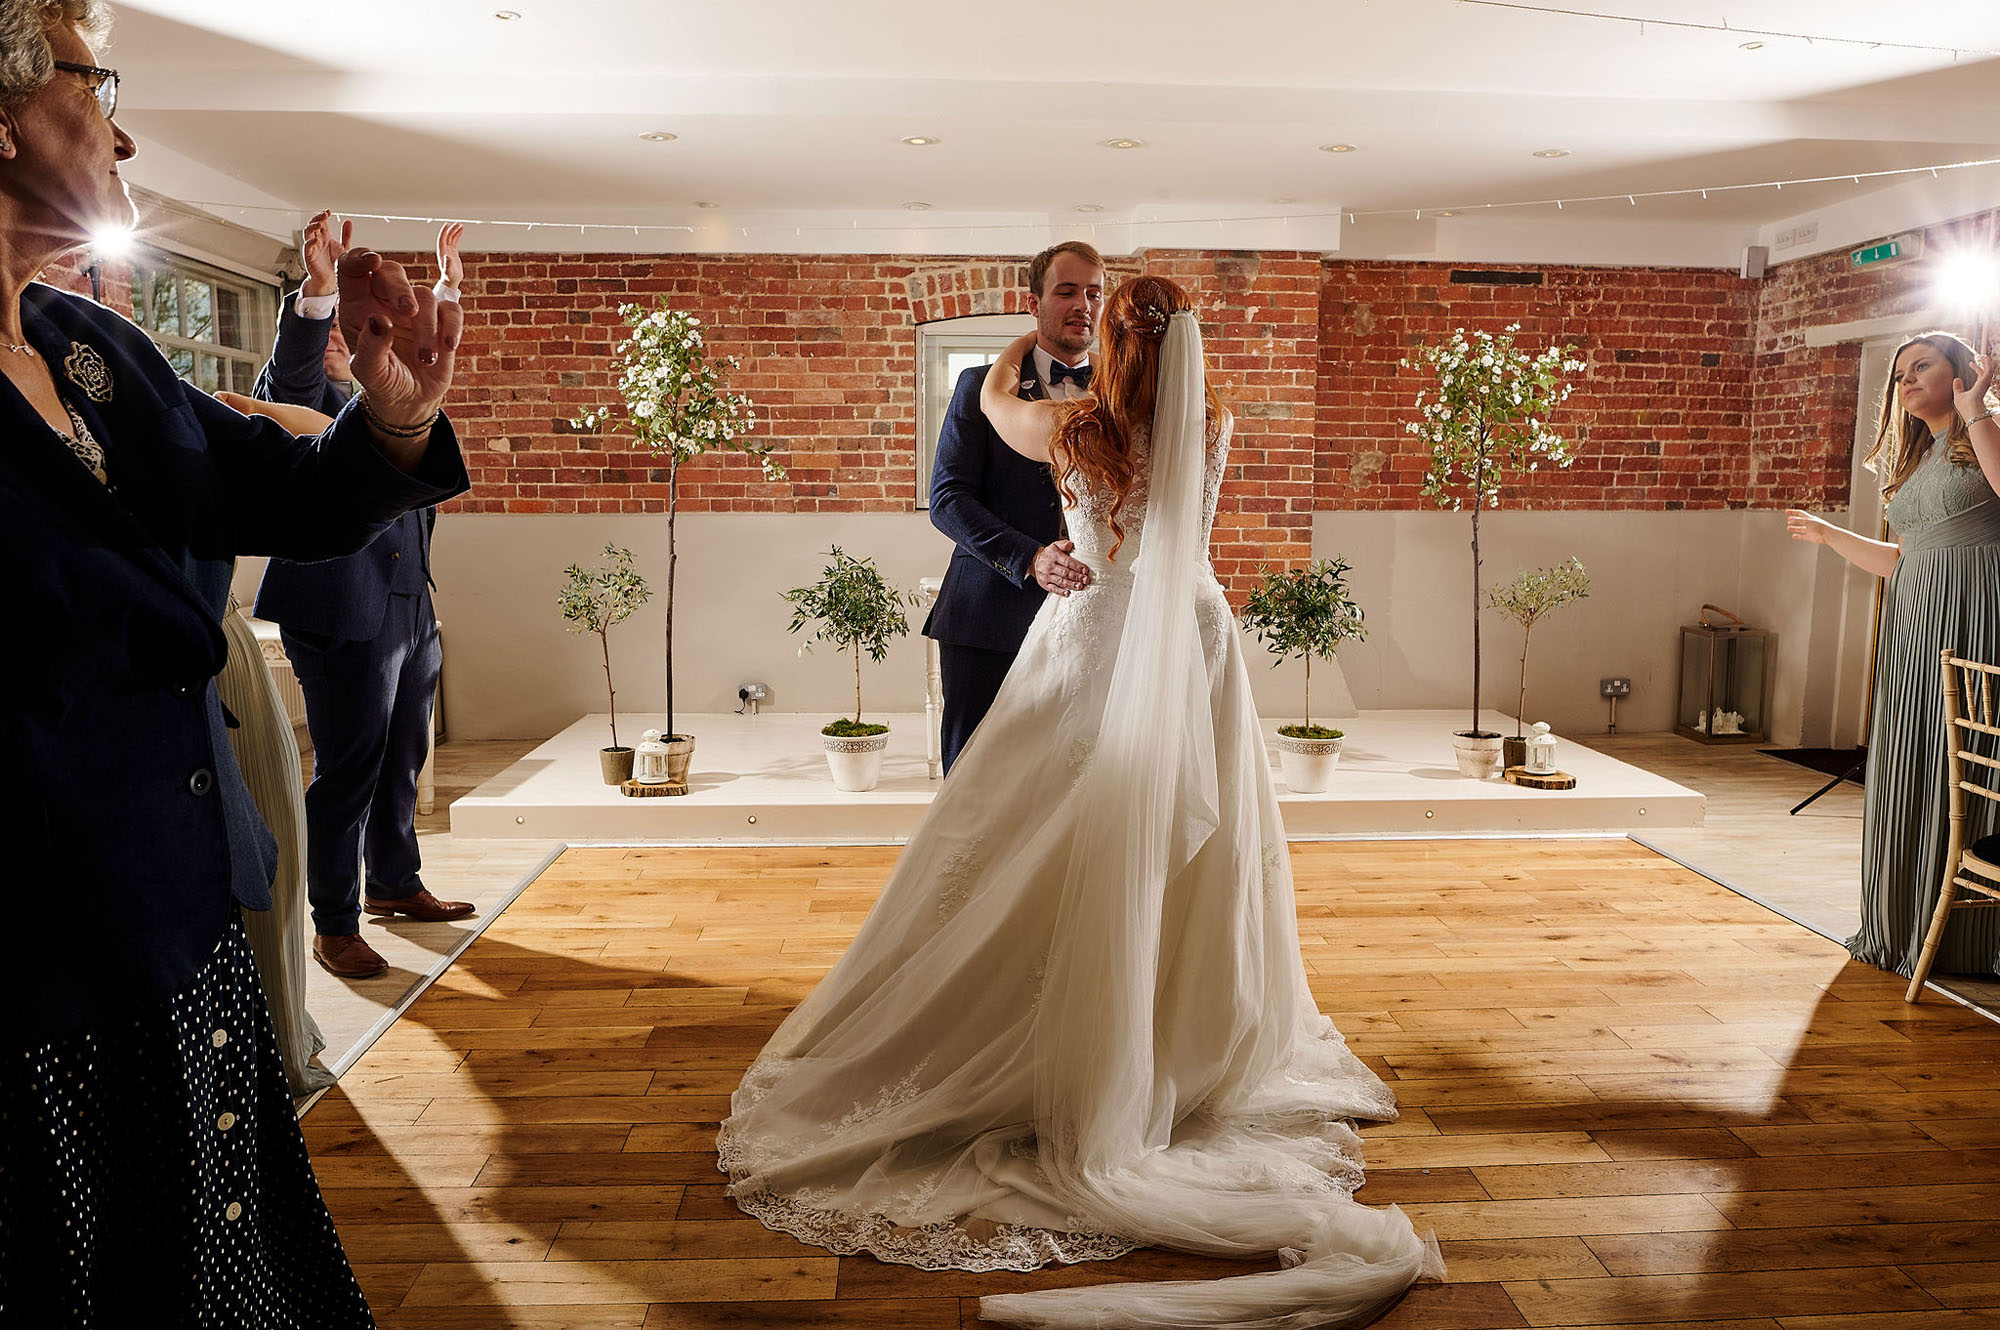 Joe and Jess's elegant rustic wedding at Sopley Mill. We love their bright yellow florals, the rustic ambience of the mill and the photos by Libra Photographic